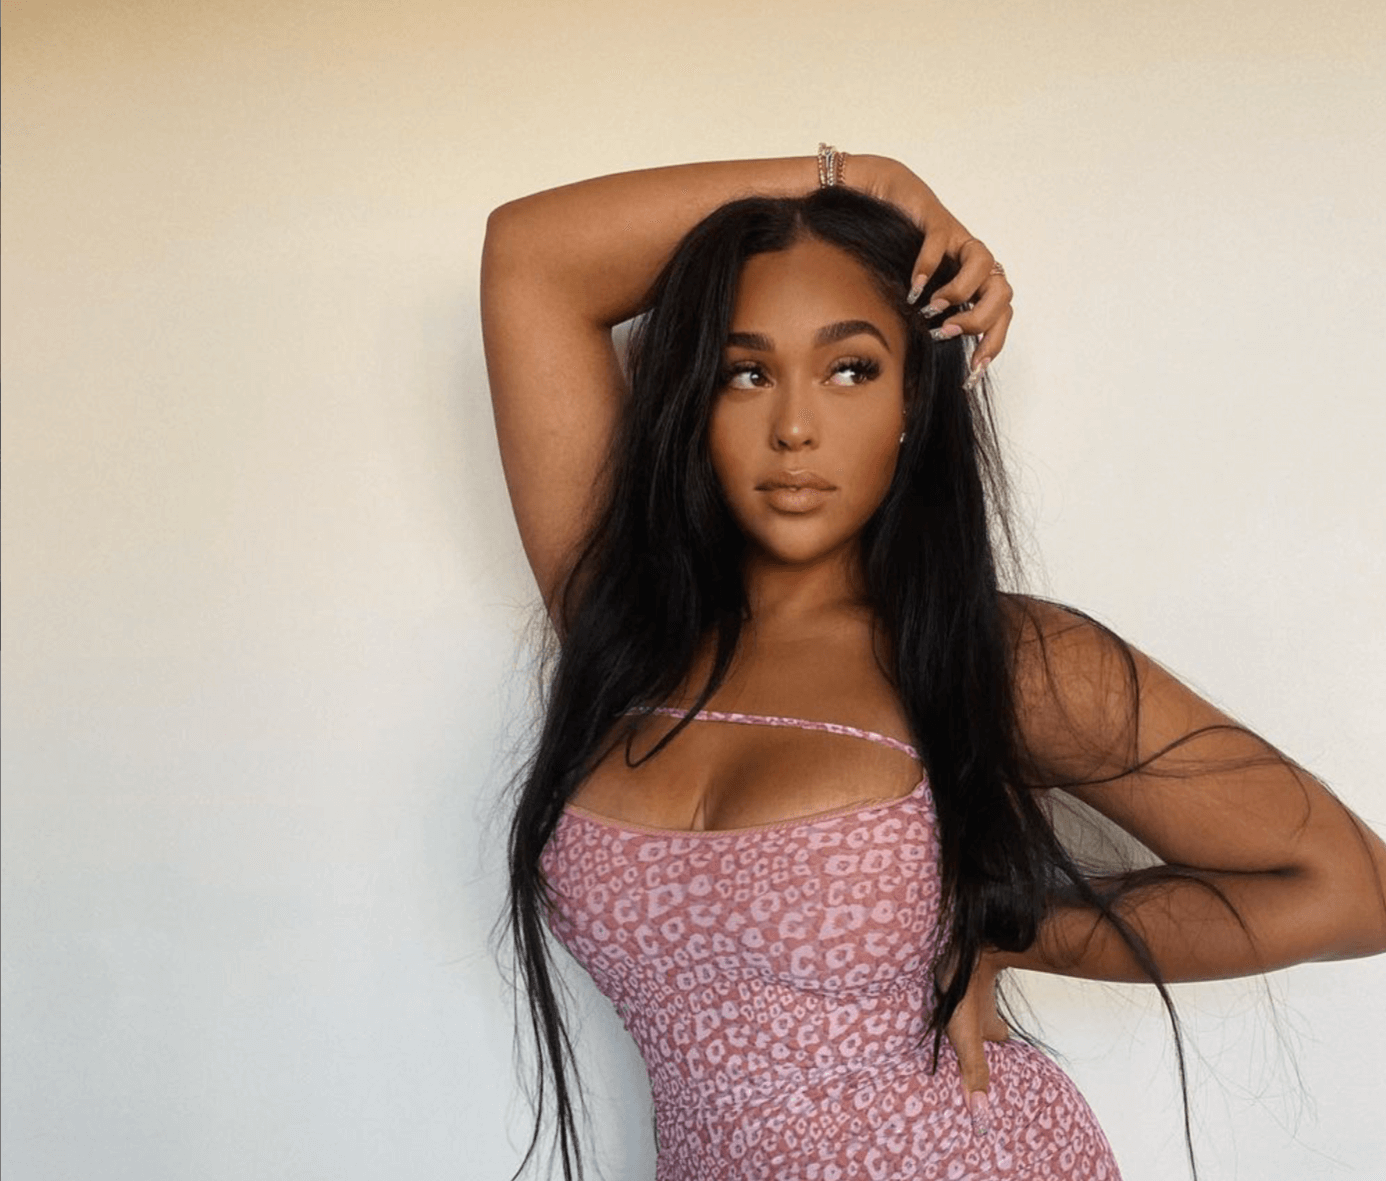 Jordyn Woods Shares Her Intense Workout At The Gym - See Her Clip Here